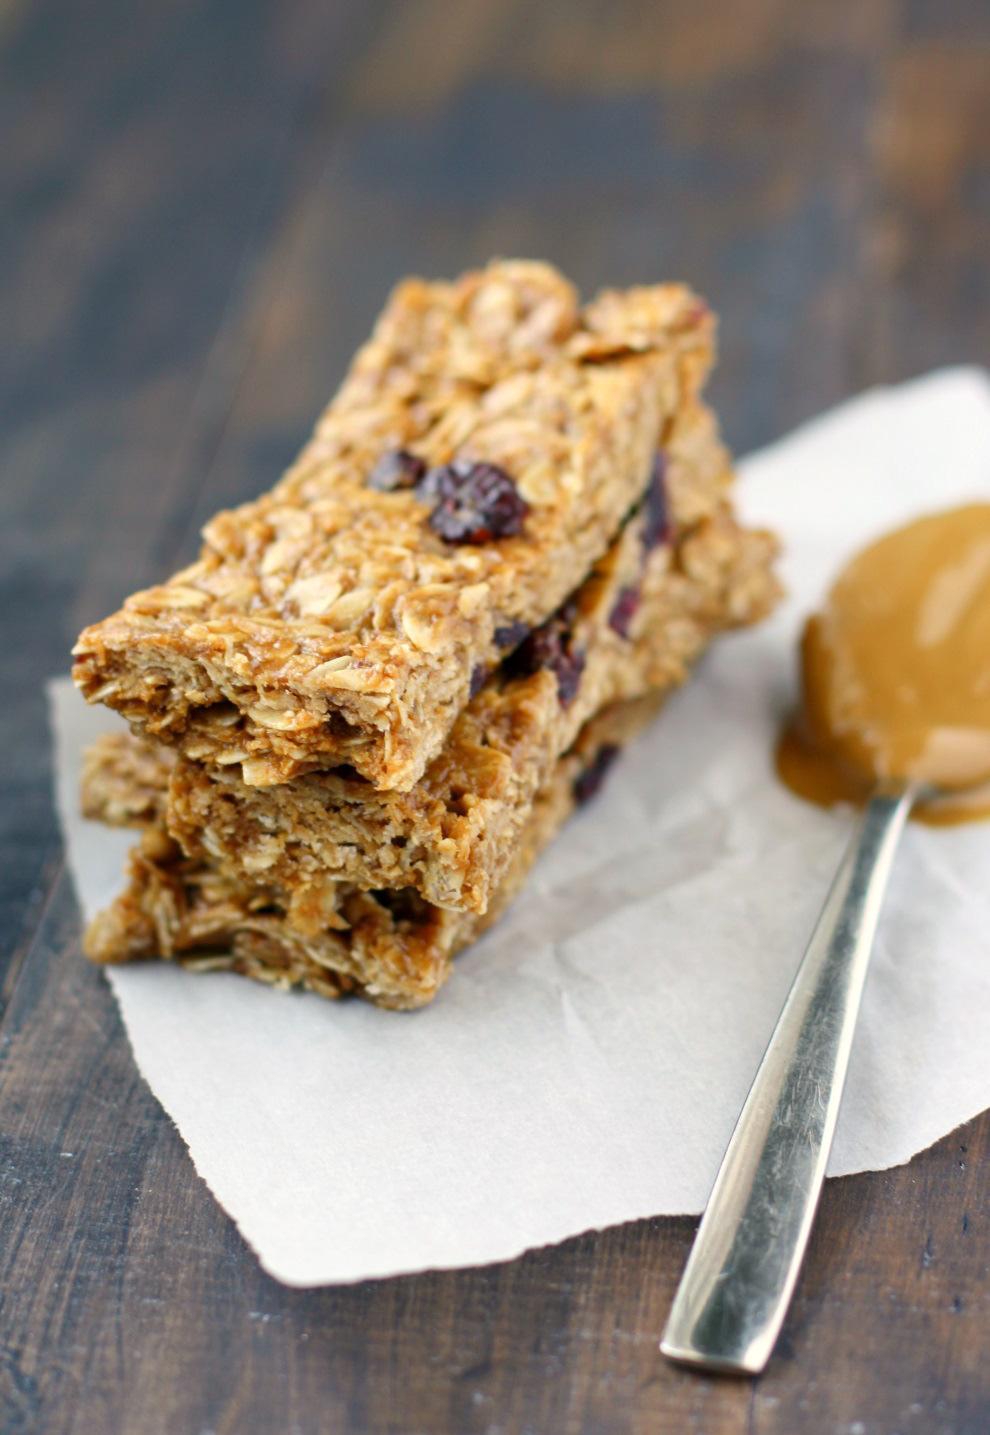 No-Bake Sunbutter Granola Bars 4 Tablespoons vegan buttery spread 4 Tablespoons sunbutter 6 Tablespoons honey or maple syrup ½ cup coconut sugar 2 ½ cups gluten free old-fashioned oats ¼ cup ground